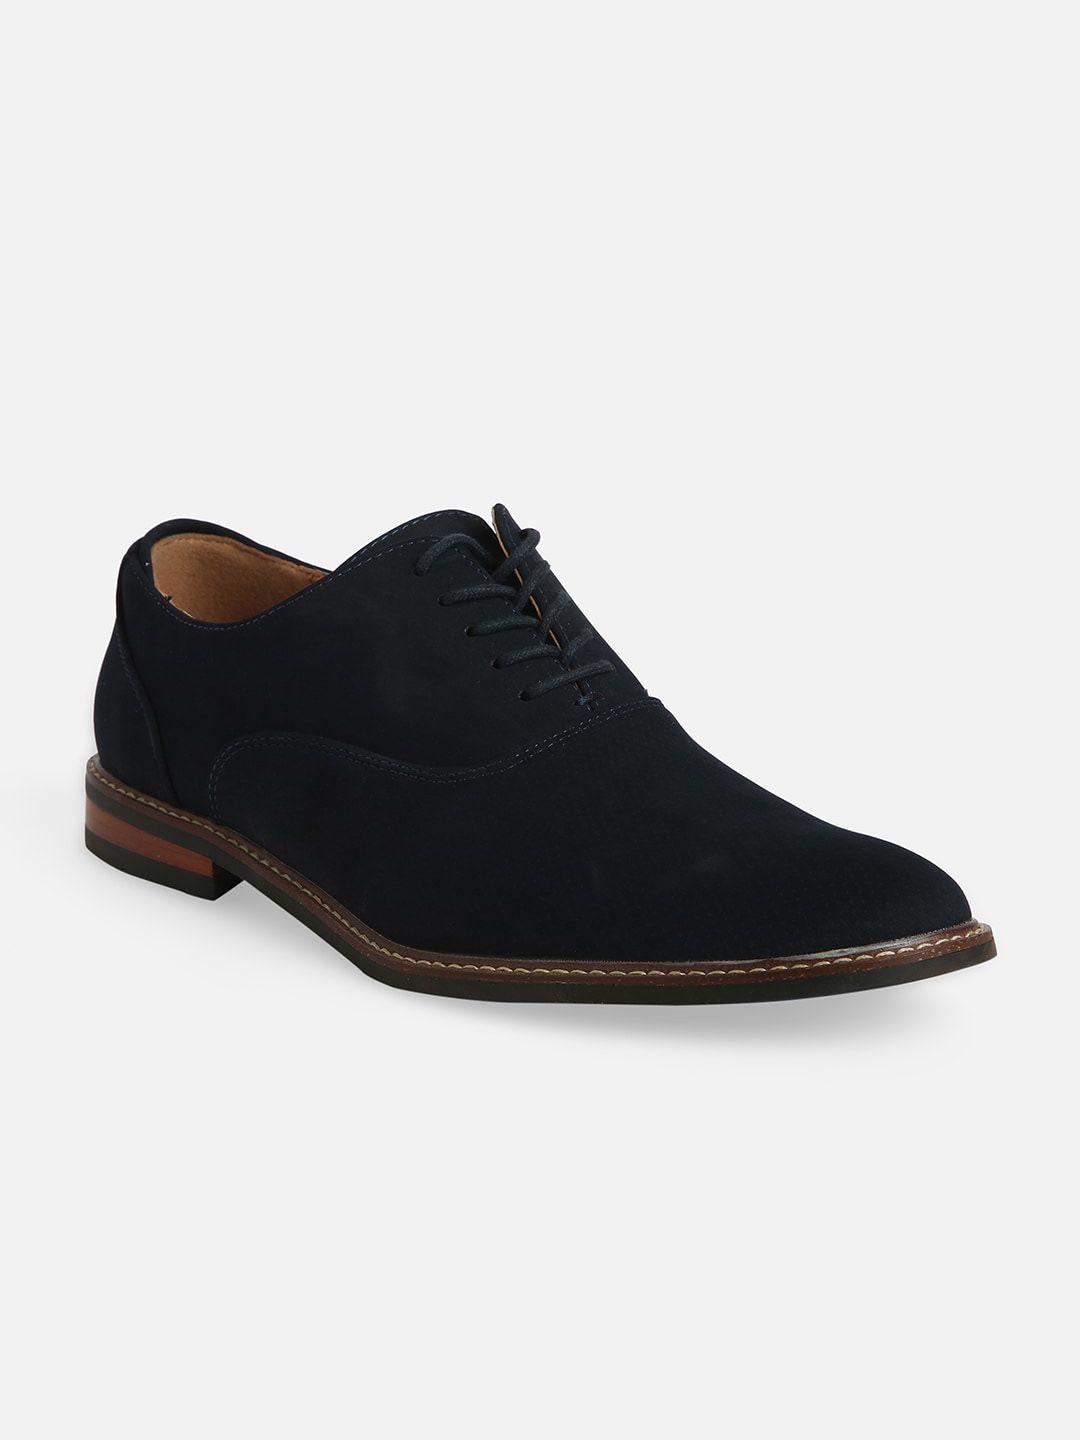 call-it-spring-men-round-toe-formal-oxfords